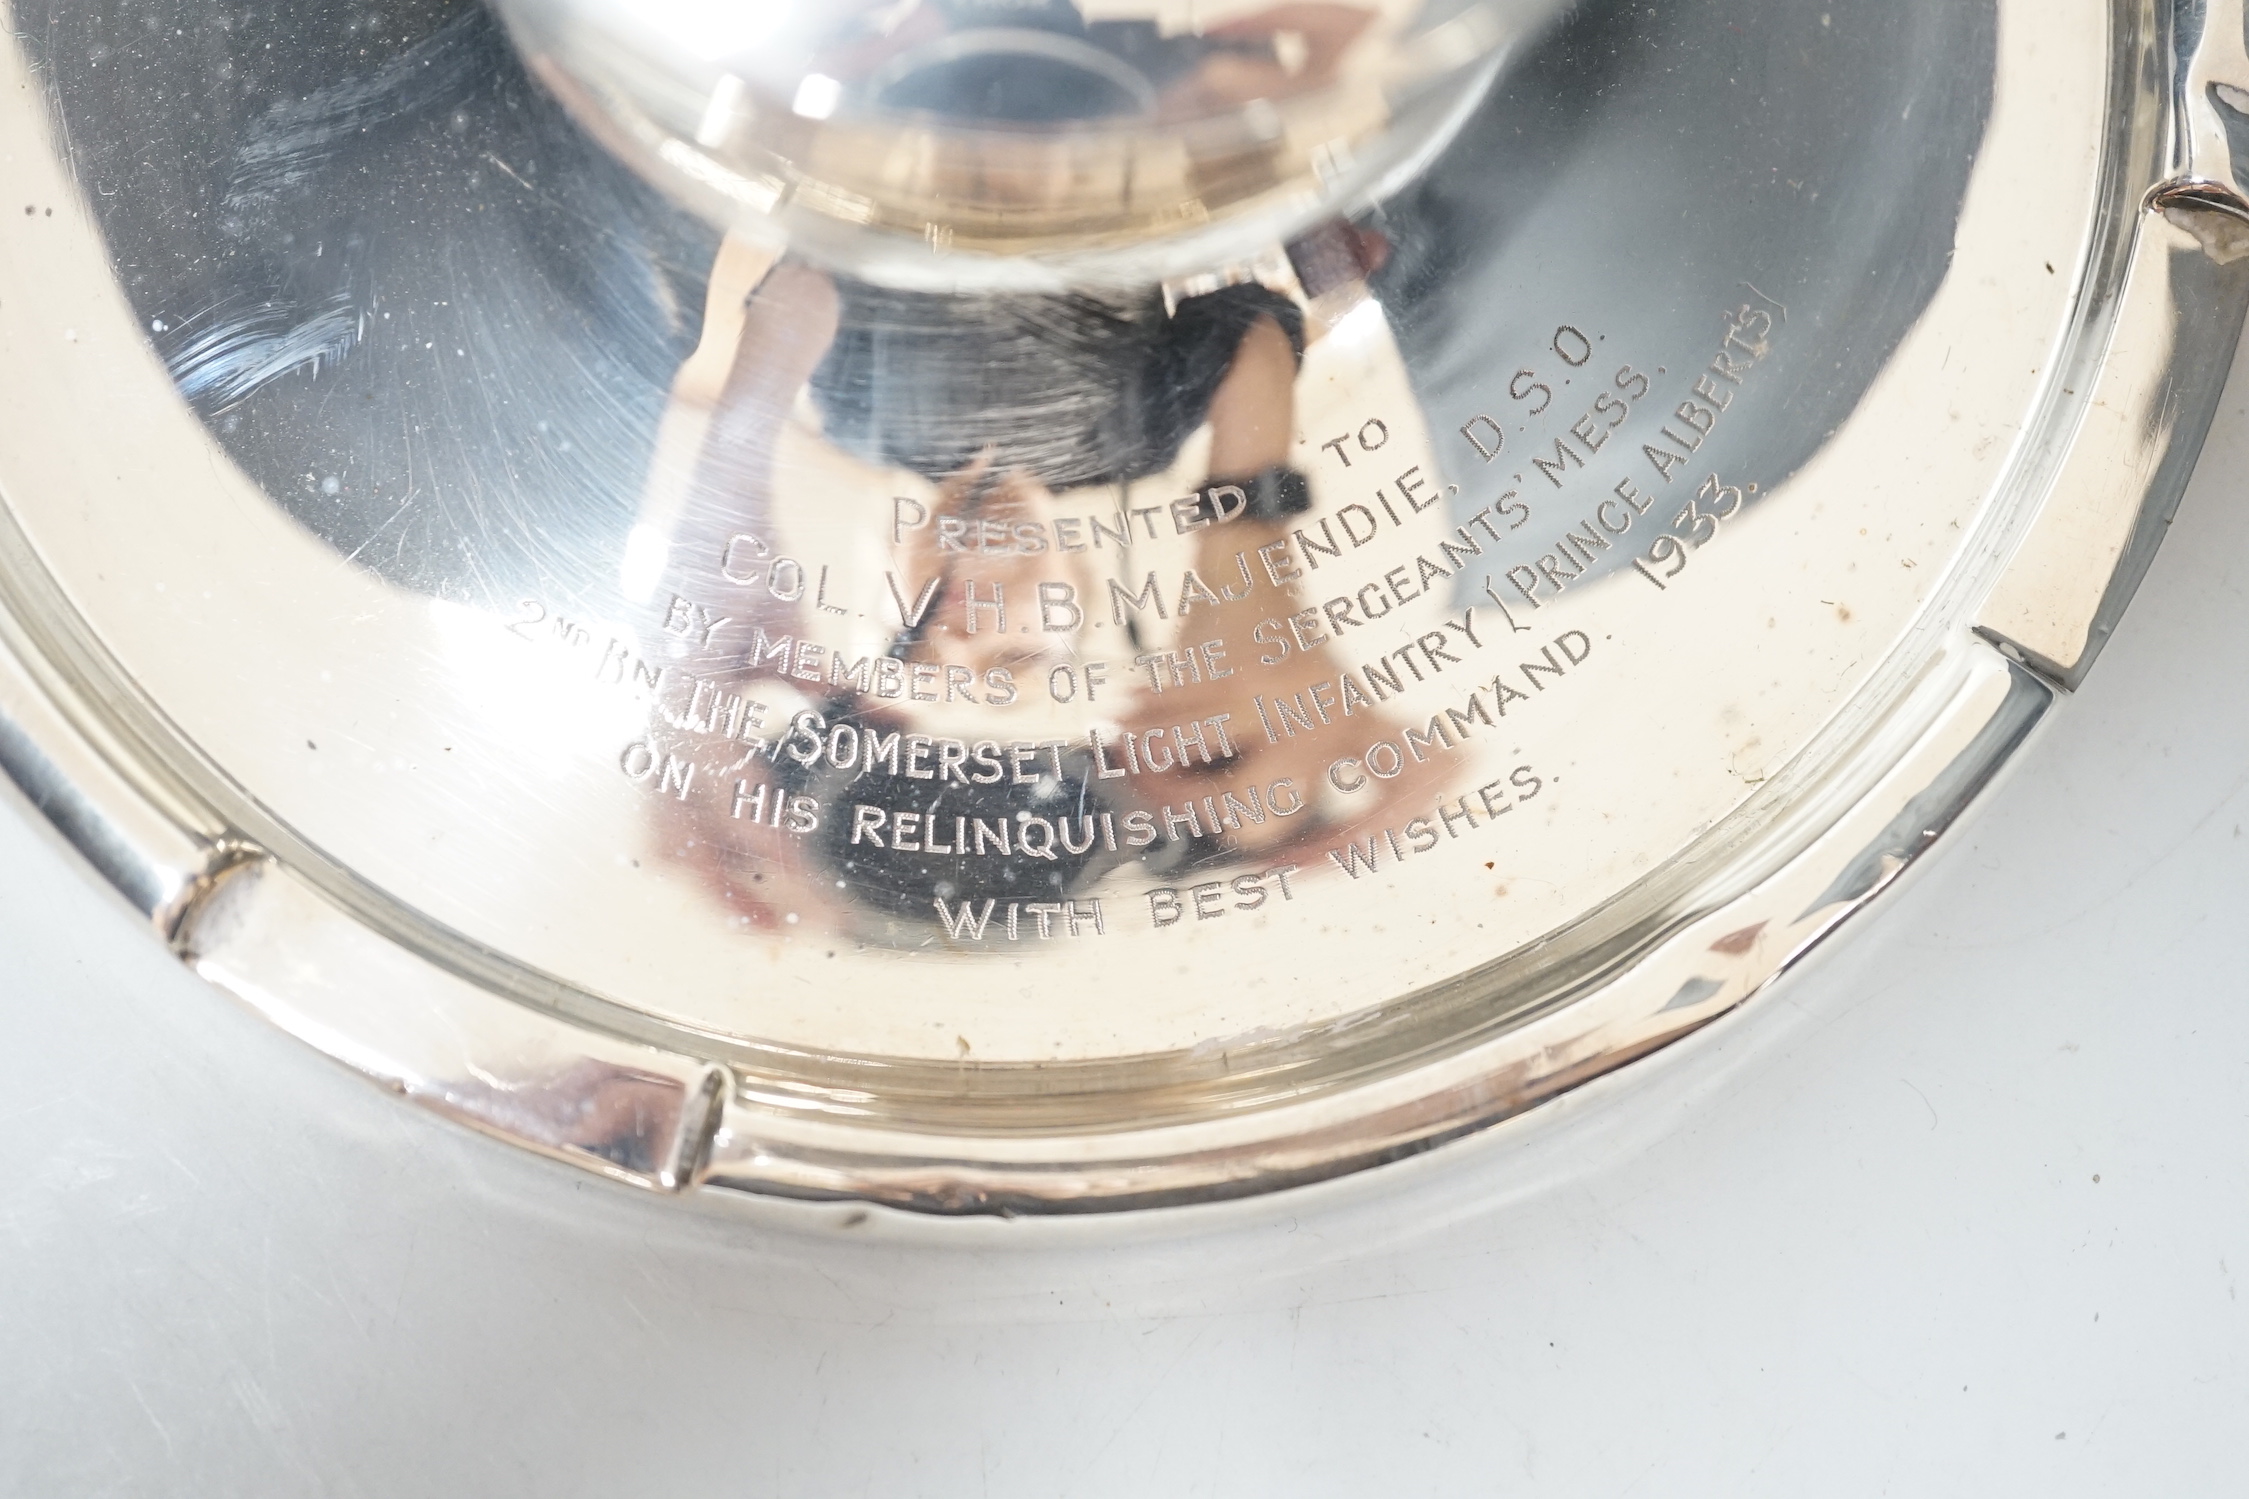 A George V silver mounted capstan inkwell, with Light Infantry related inscription, A & J Zimmerman, Birmingham, 1931, diameter 17.7cm.